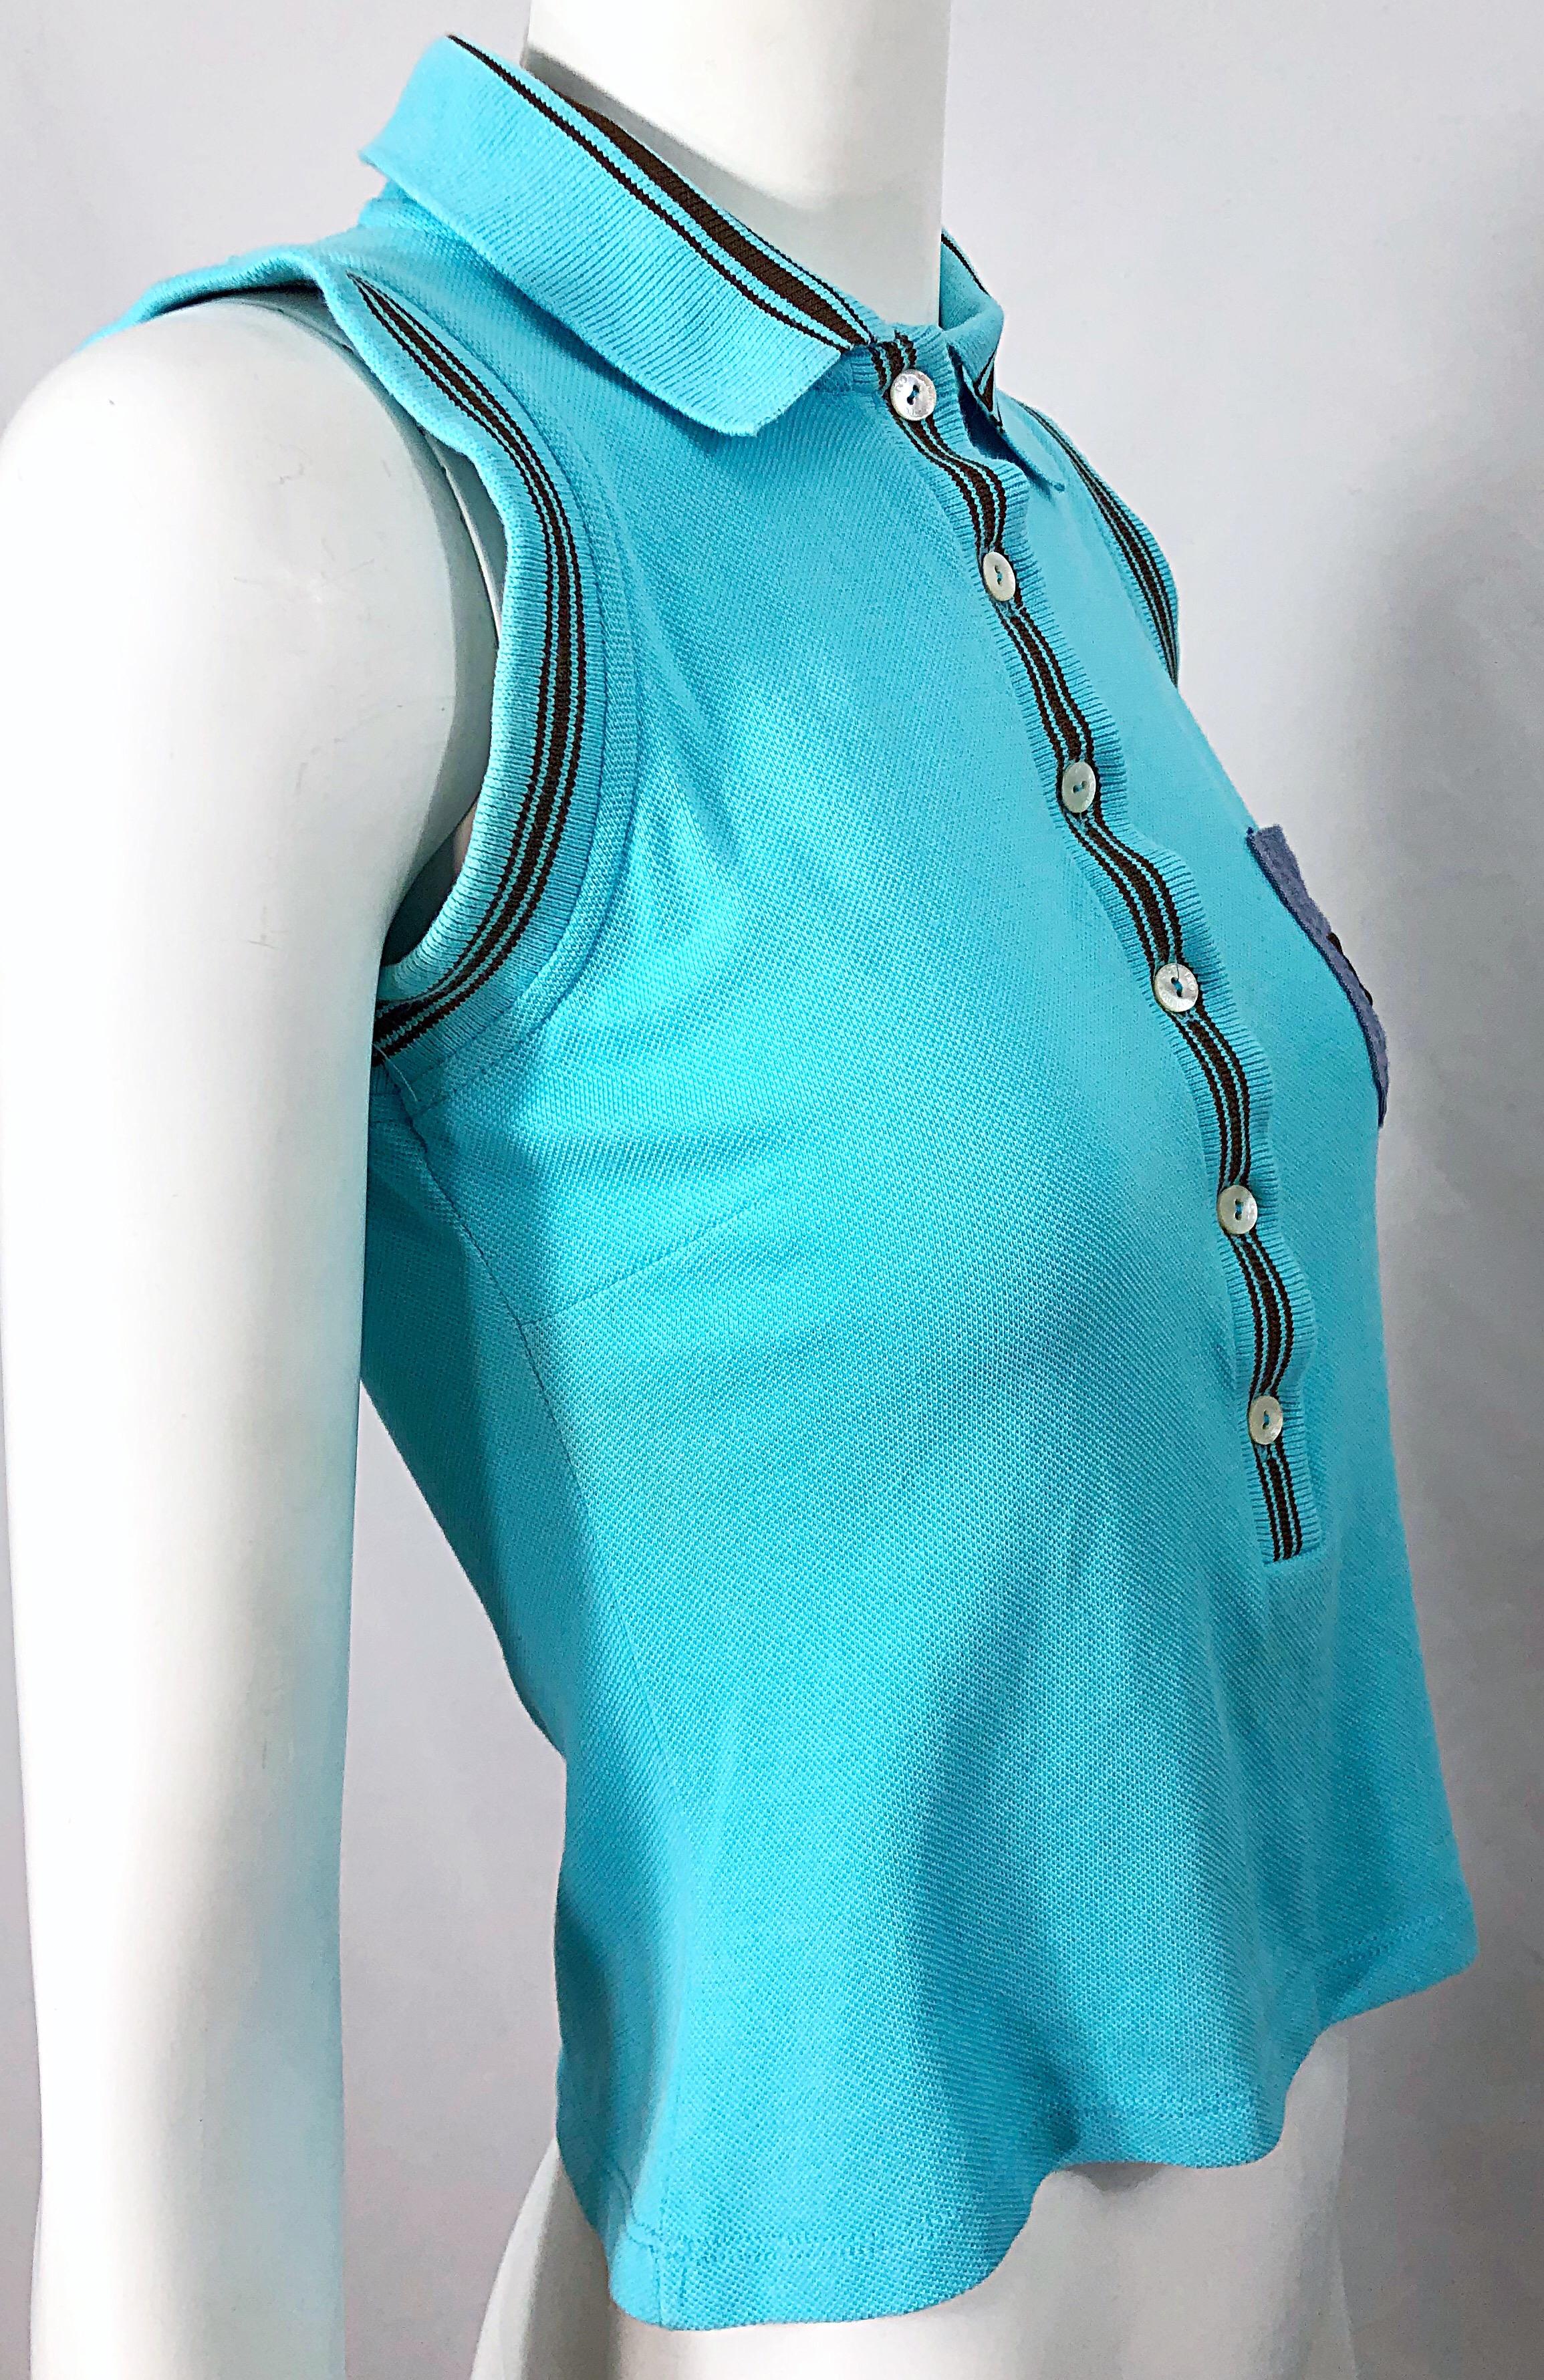 Vintage Dolce & Gabbana 1990s Turquoise Blue + Brown Logo 90s Knit Crop Top Polo For Sale 5